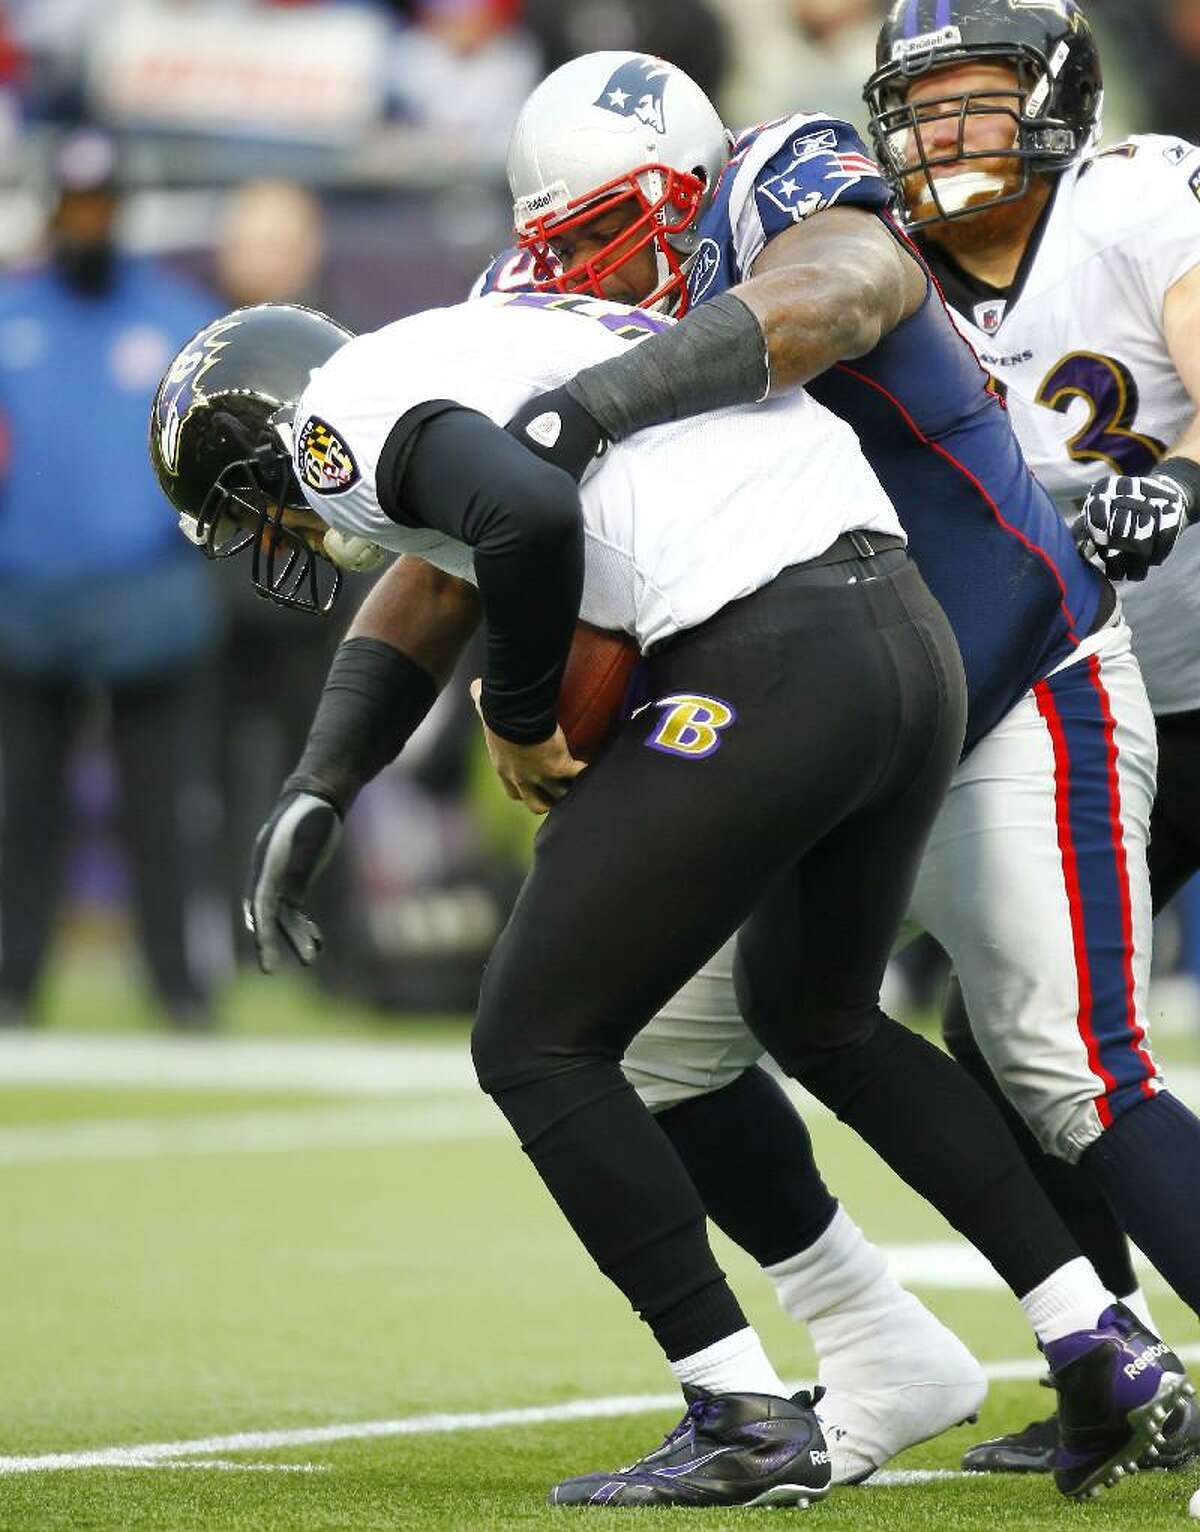 ASSOCIATED PRESS New England Patriots defensive end Vince Wilfork (75) sacks Baltimore Ravens quarterback Joe Flacco (5) during the AFC championship game on Jan. 22 at Gillette Stadium in Foxborough, Mass. Wilfork is not easy to move out of the middle of the Patriots' defense.